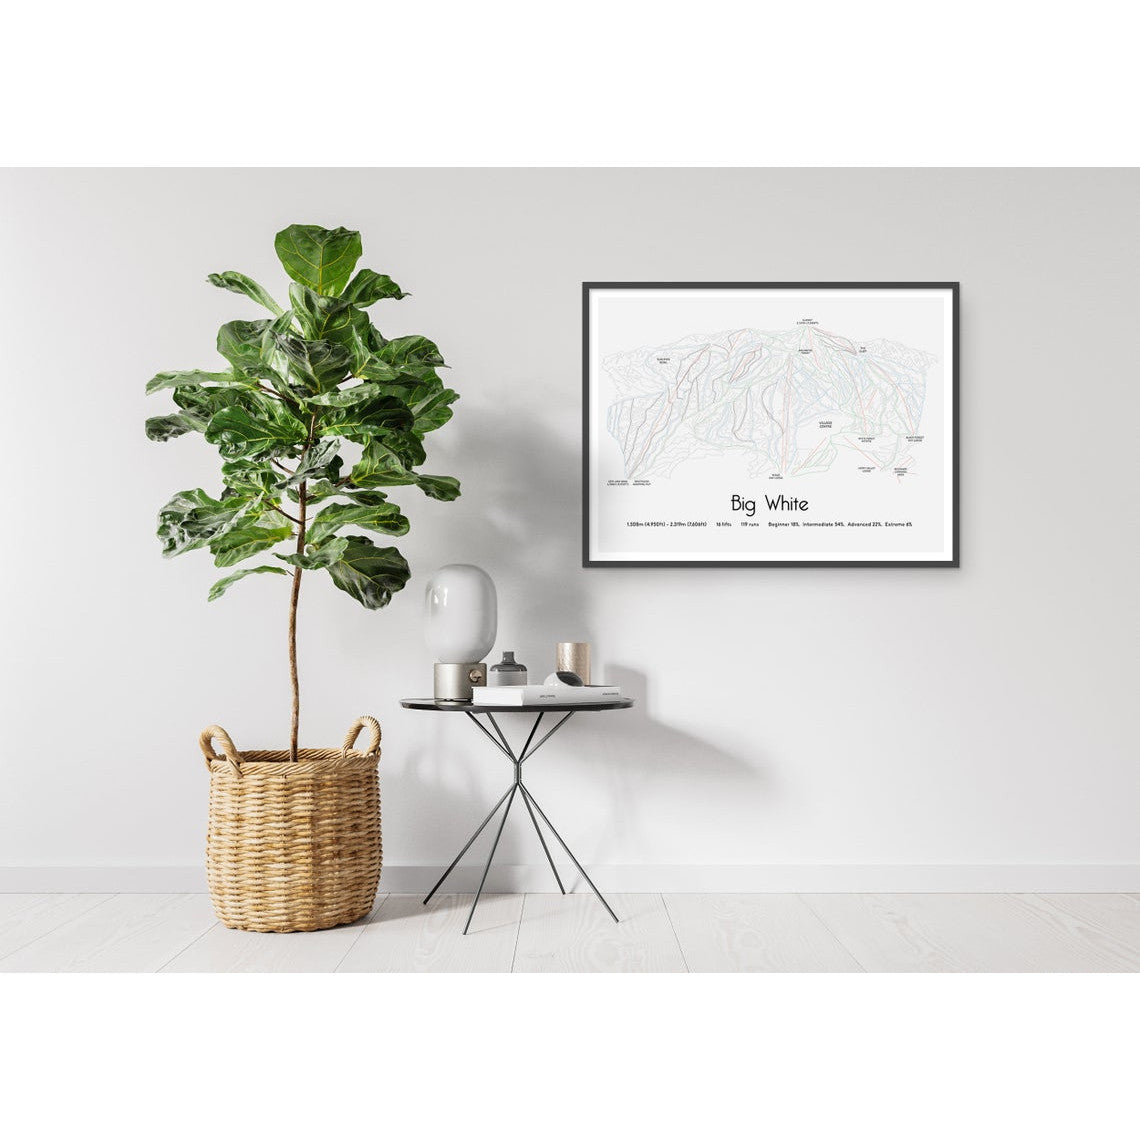 Big White Piste Map Wall Print Poster | Bluebell and Moss | Backcountry Books